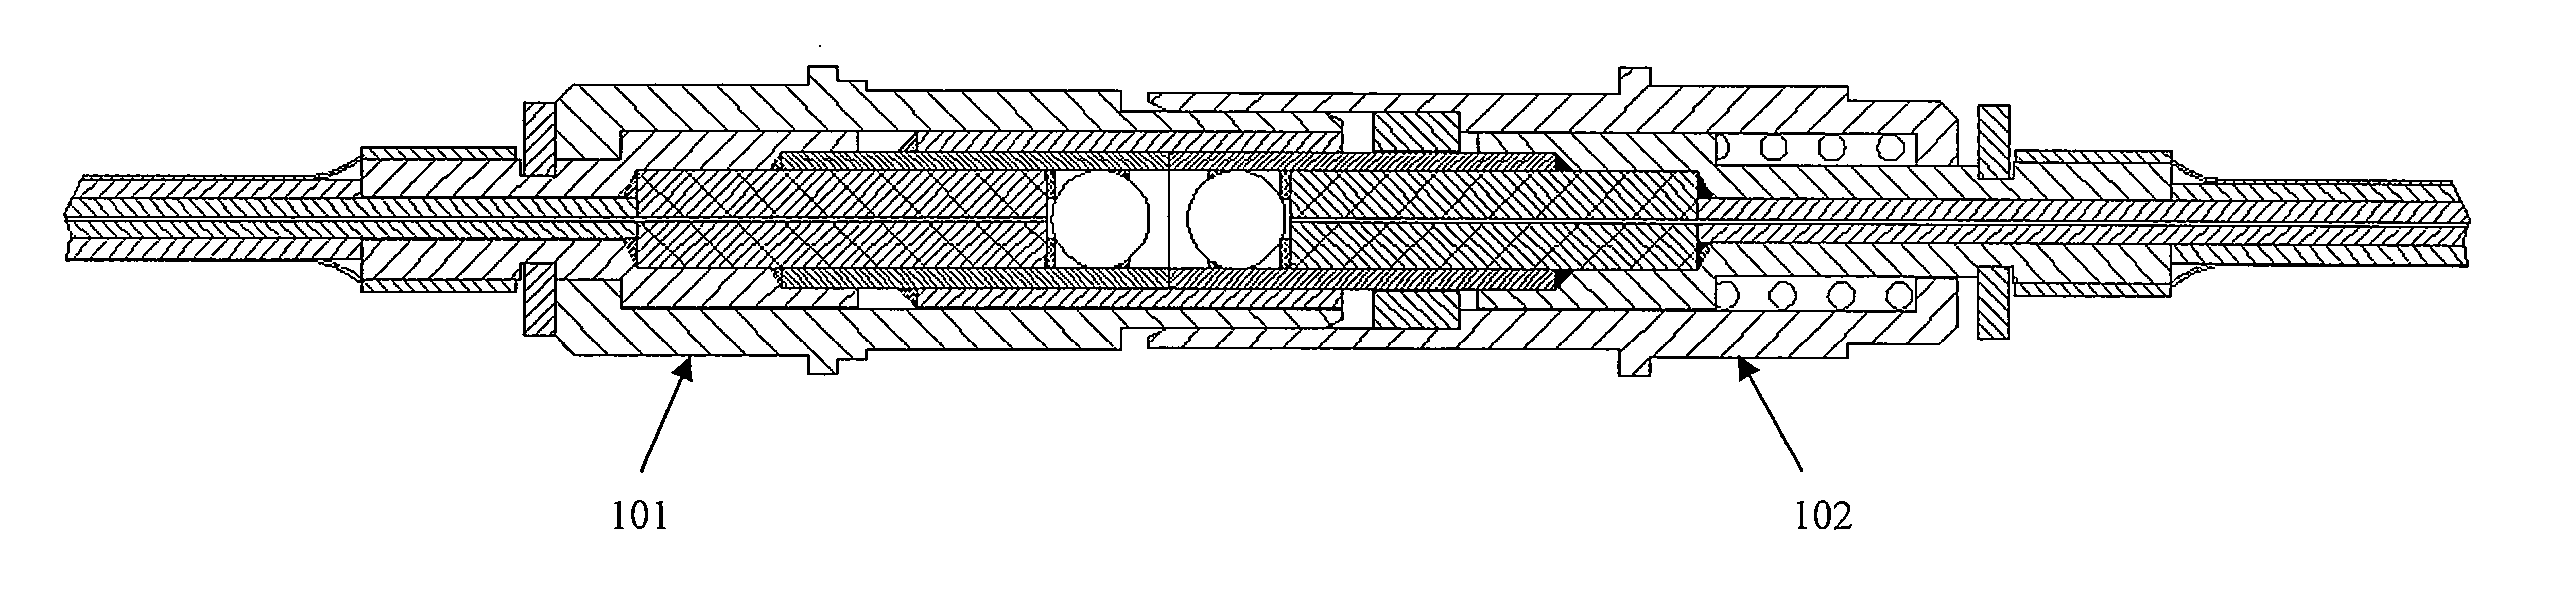 Single-channel expanded beam connector